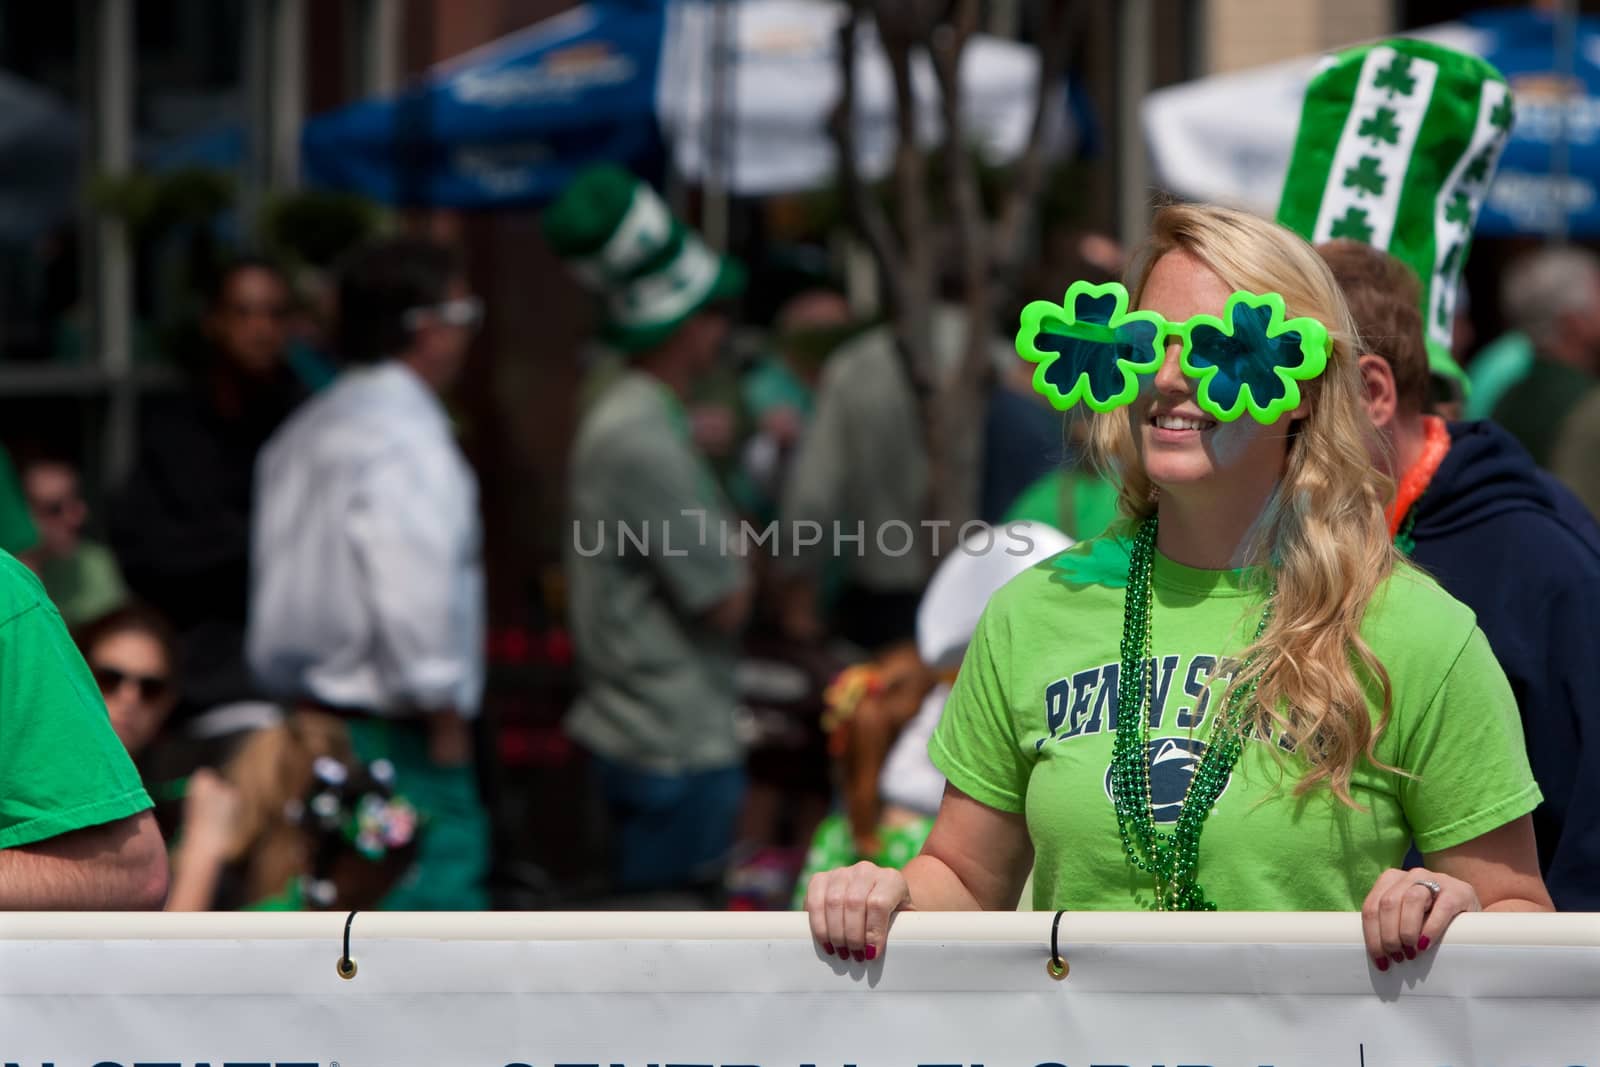 Woman In Oversized Shamrock Sunglasses Carries Banner In Parade by BluIz60